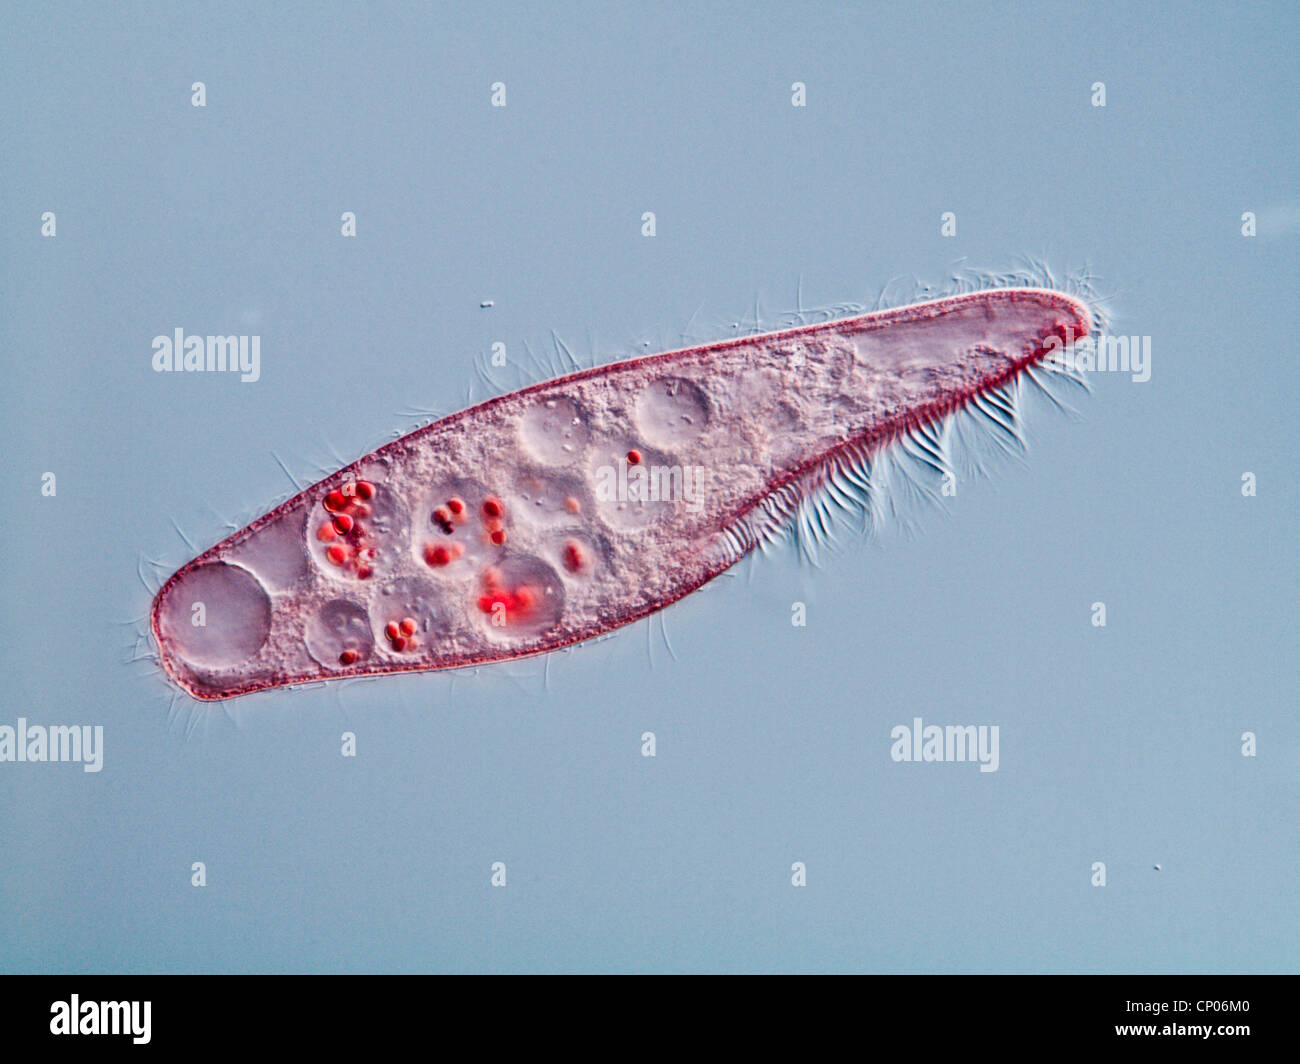 Blepharisma americana (Blepharisma americana), pink ciliate feeding on dyed yeasts, Germany Stock Photo